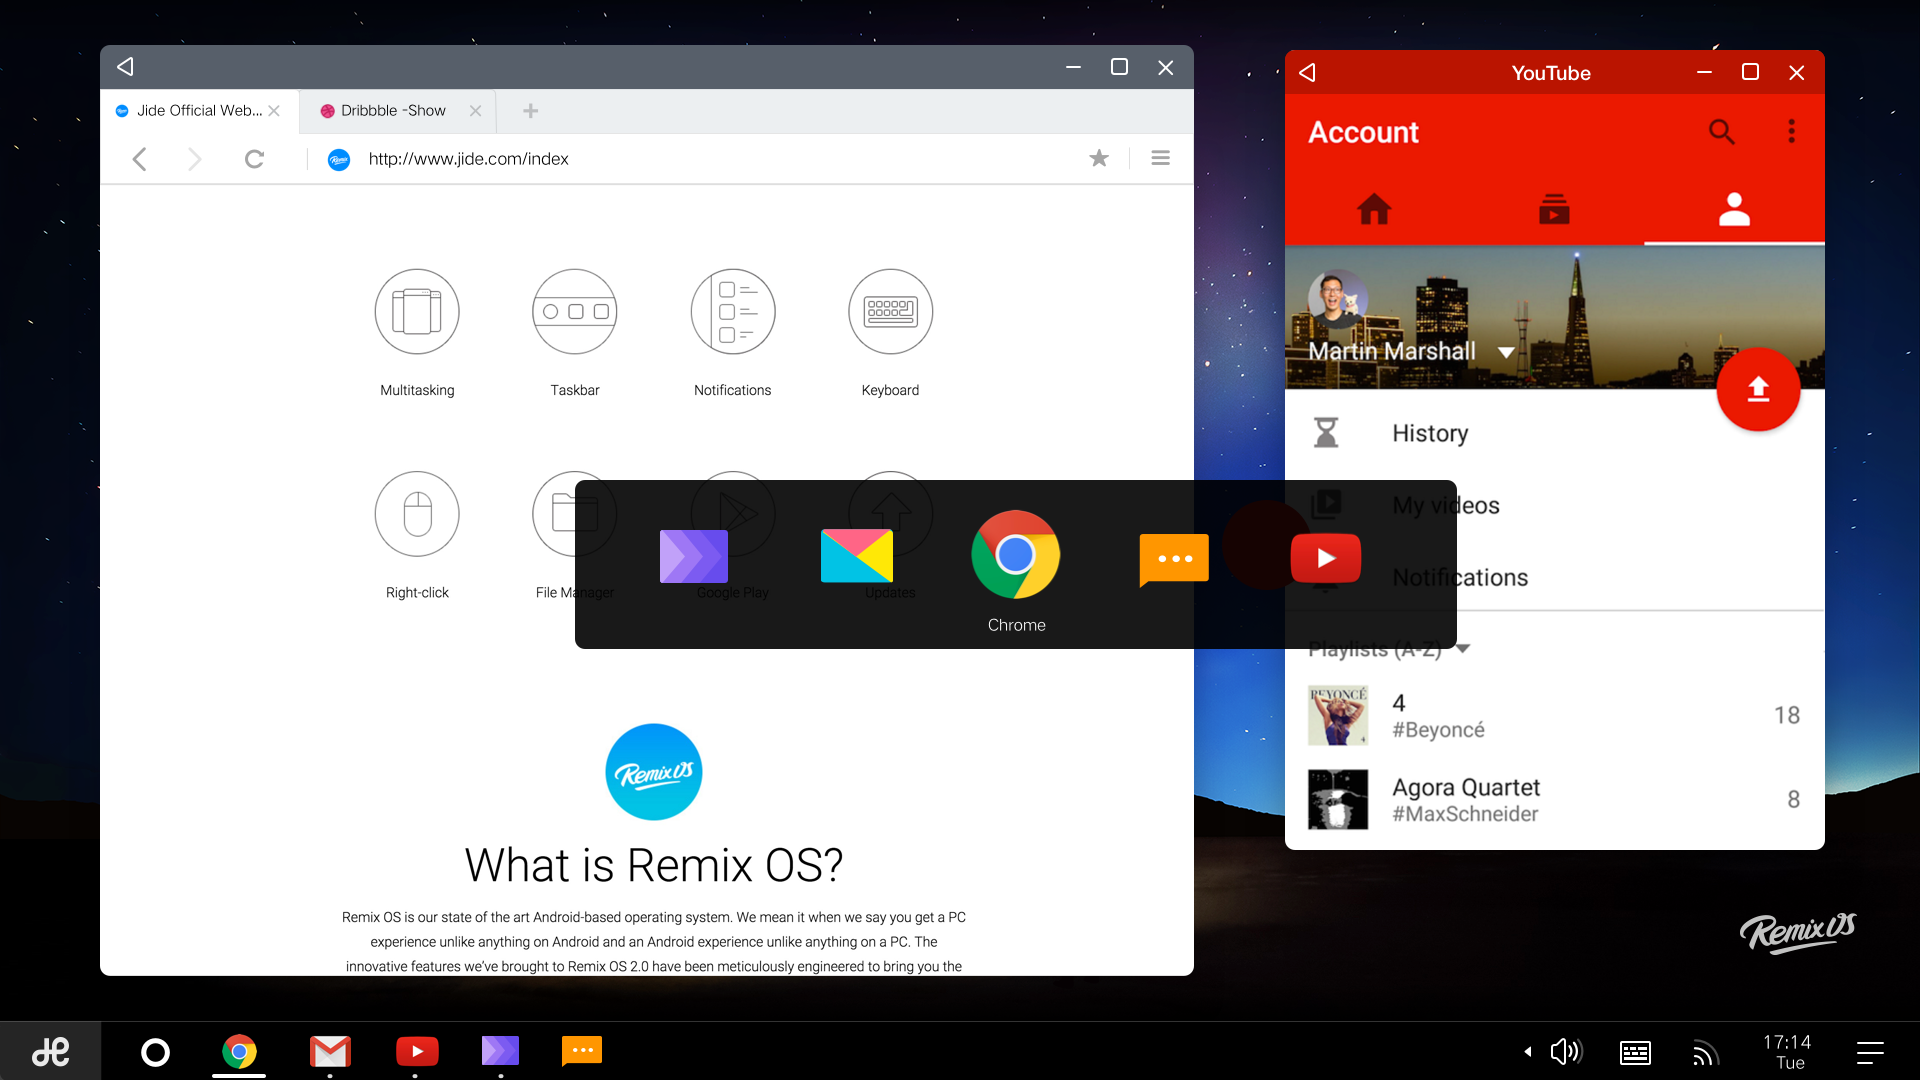 remix os installation tool not working